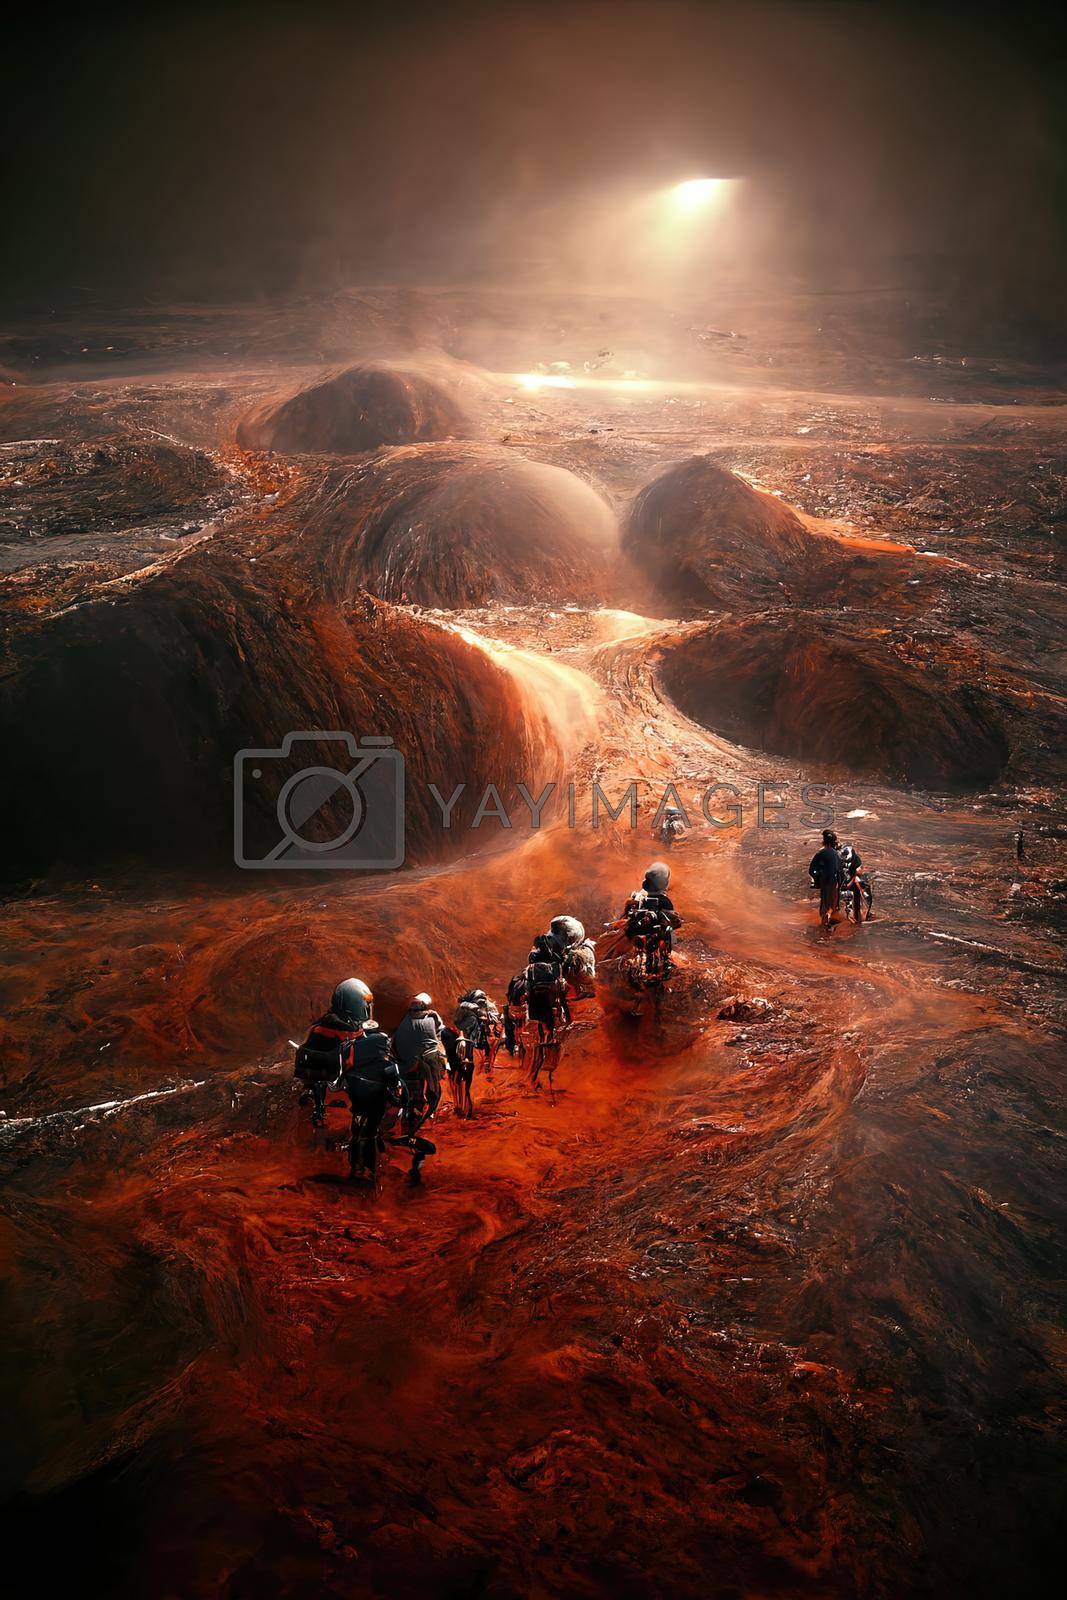 Royalty free image of People arriving on Mars, 3d render by Farcas